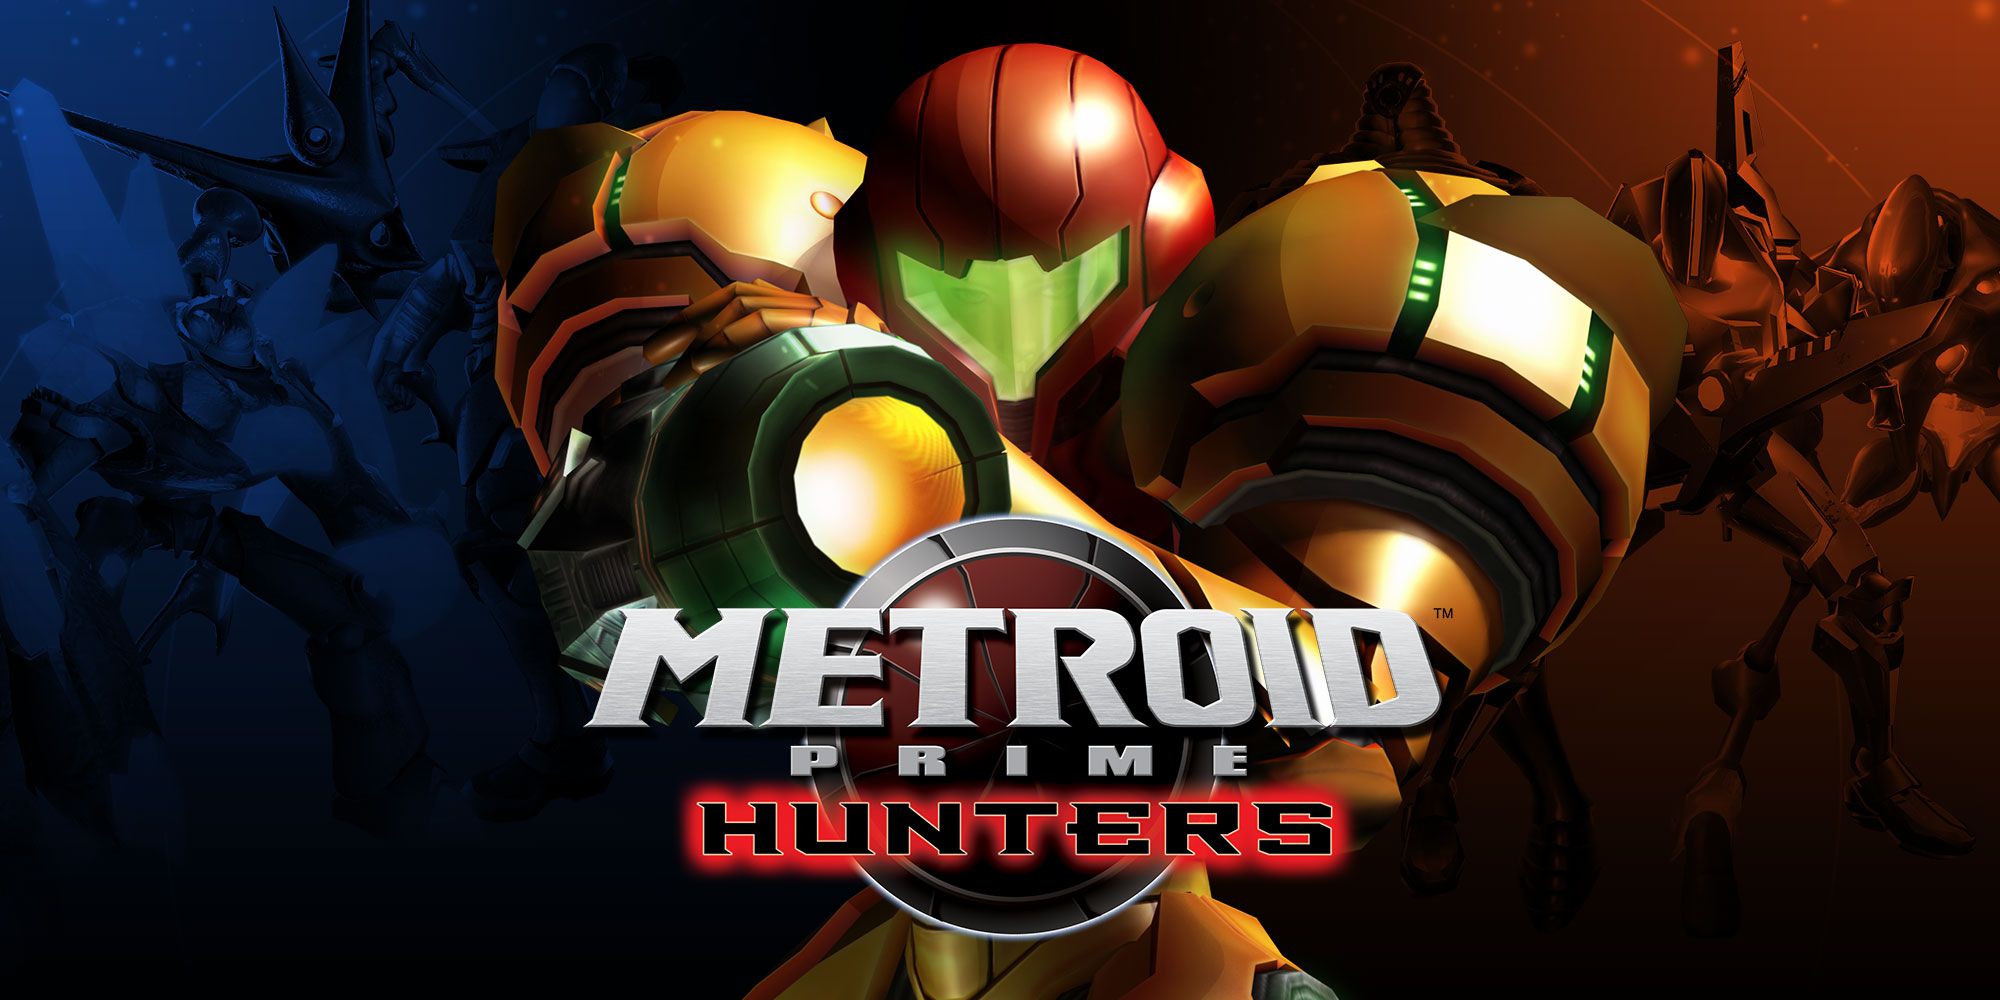 This is the logo for Metroid Prime: Hunters.